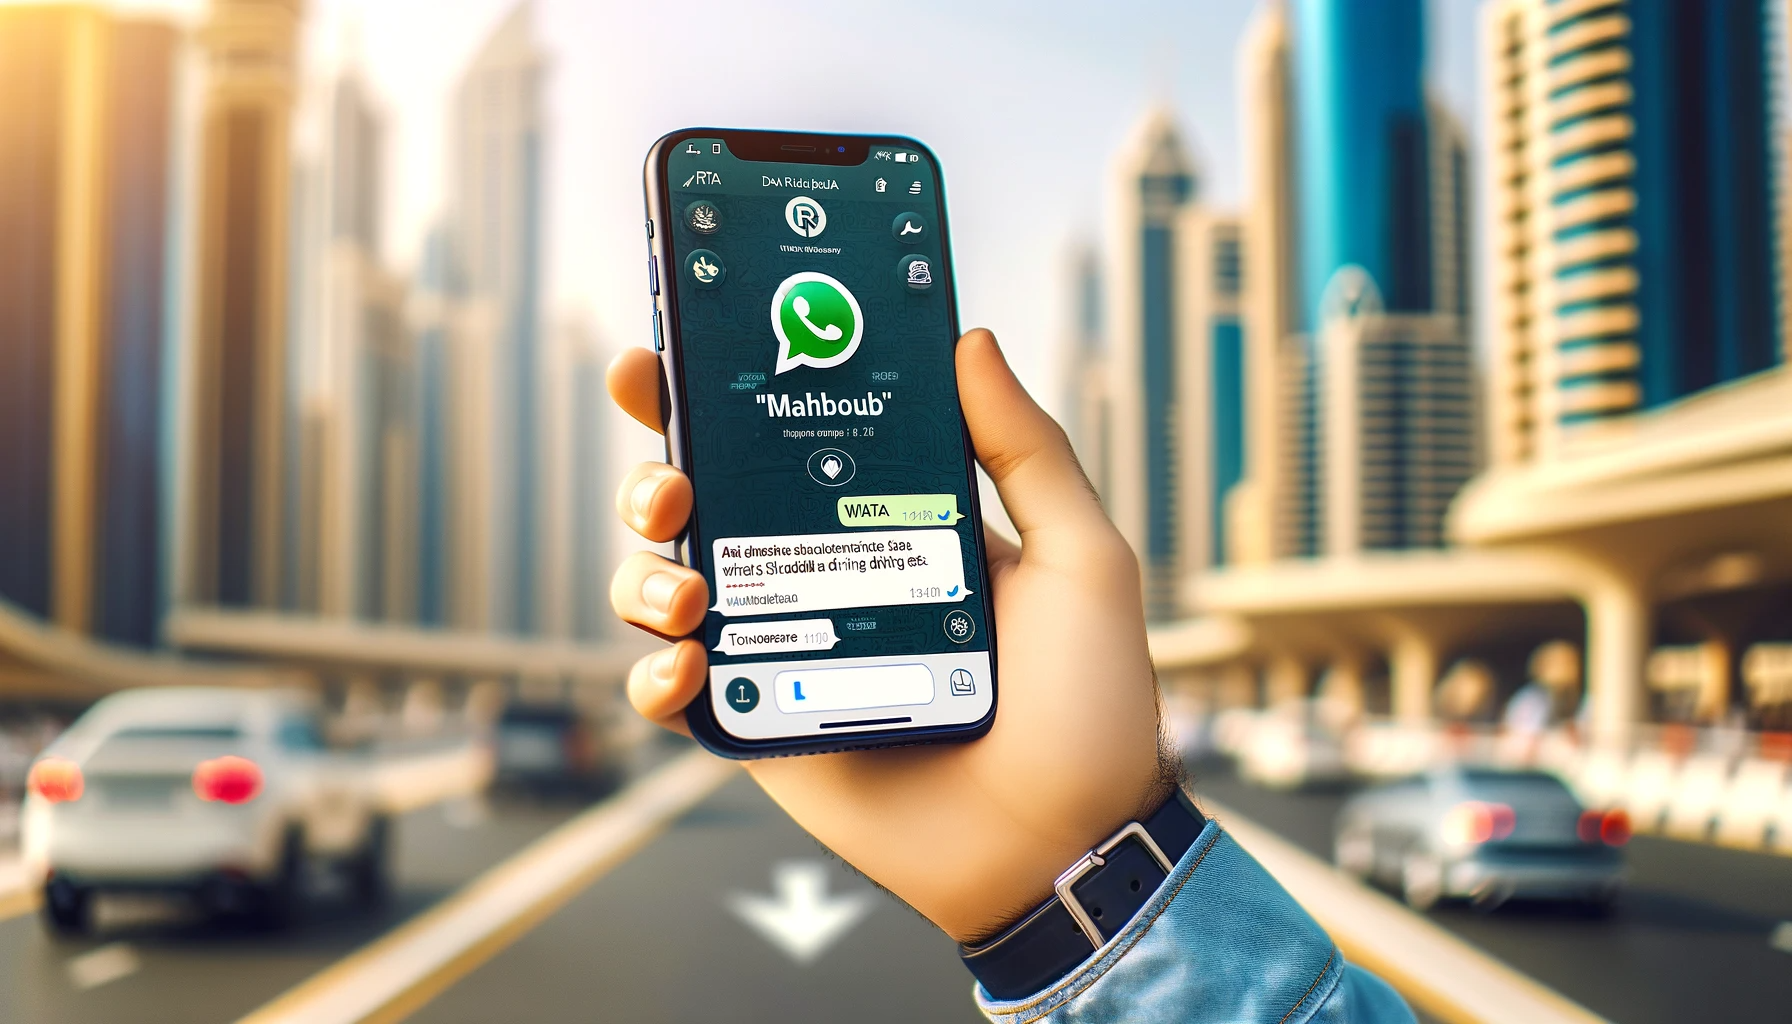 DALL·E 2024 01 06 11.23.54 A person using their smartphone to access the RTA Mahboub Chatbot on WhatsApp. The smartphone screen prominently displays the RTA logo and the Whats